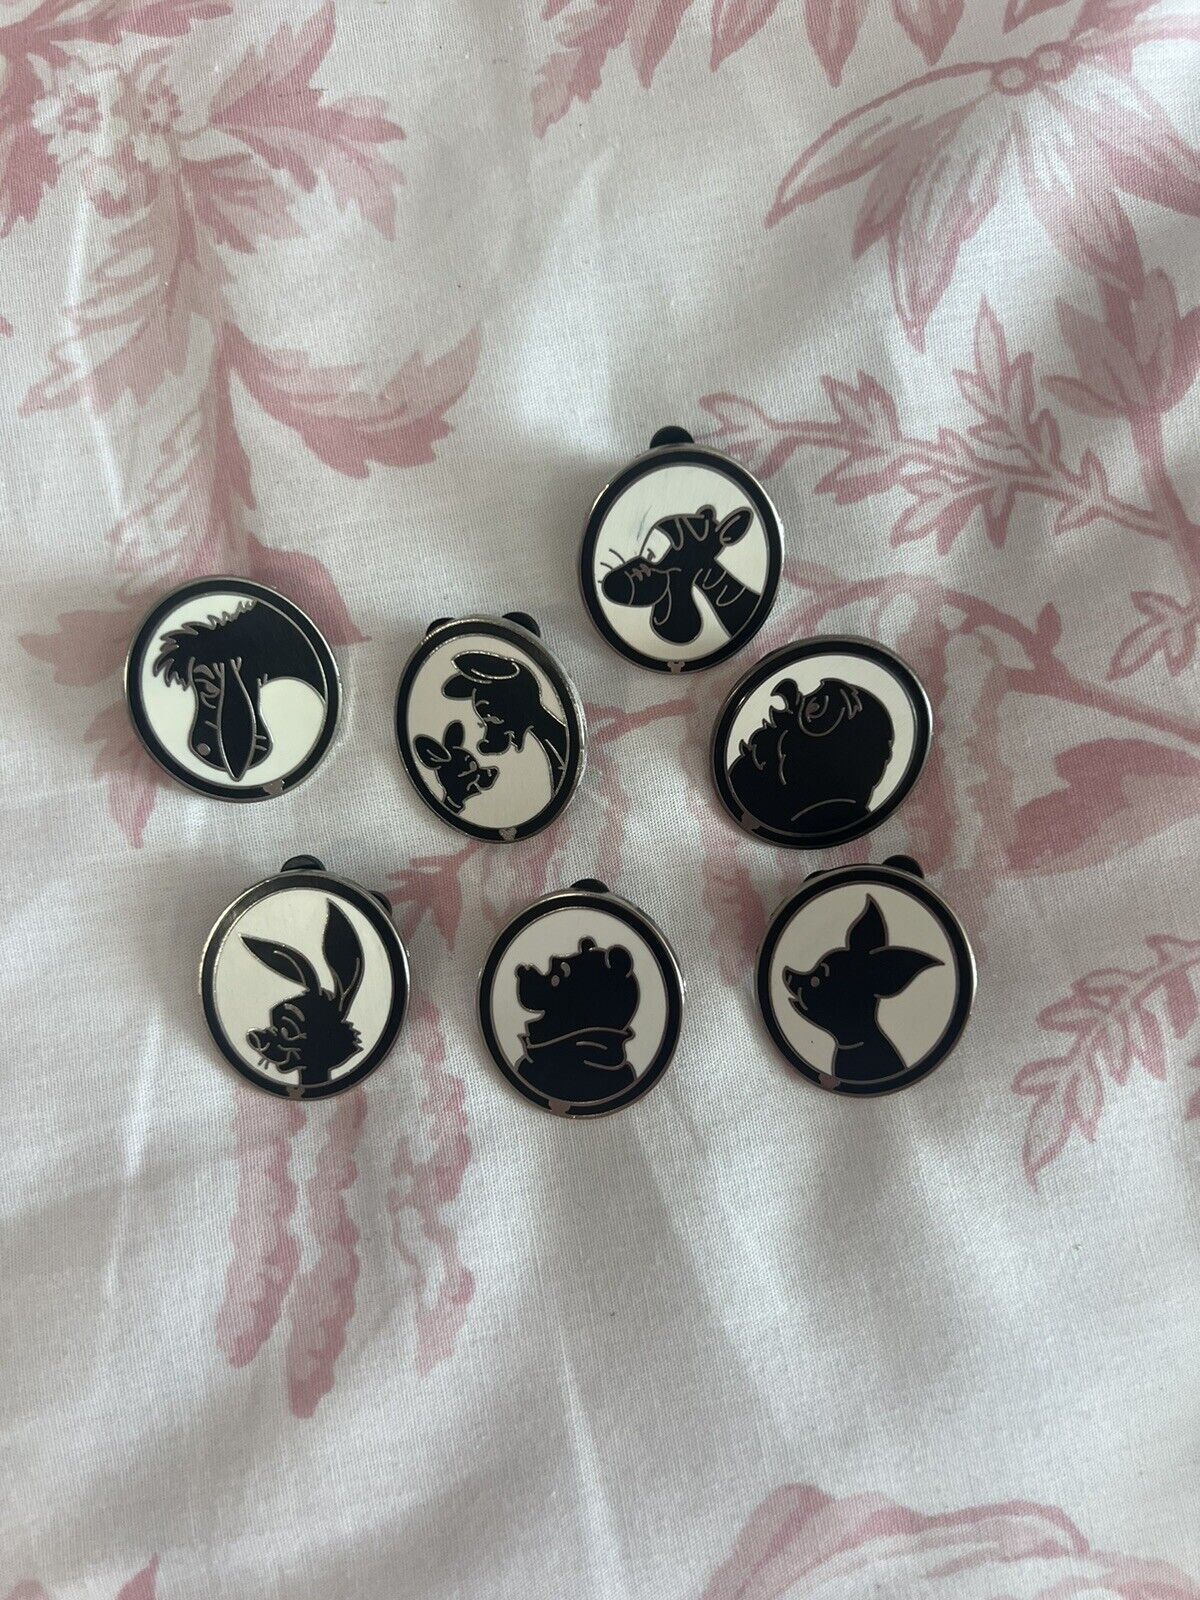 Complete Set of 7 Winnie the Pooh & Friends Silhouette Pin Lot